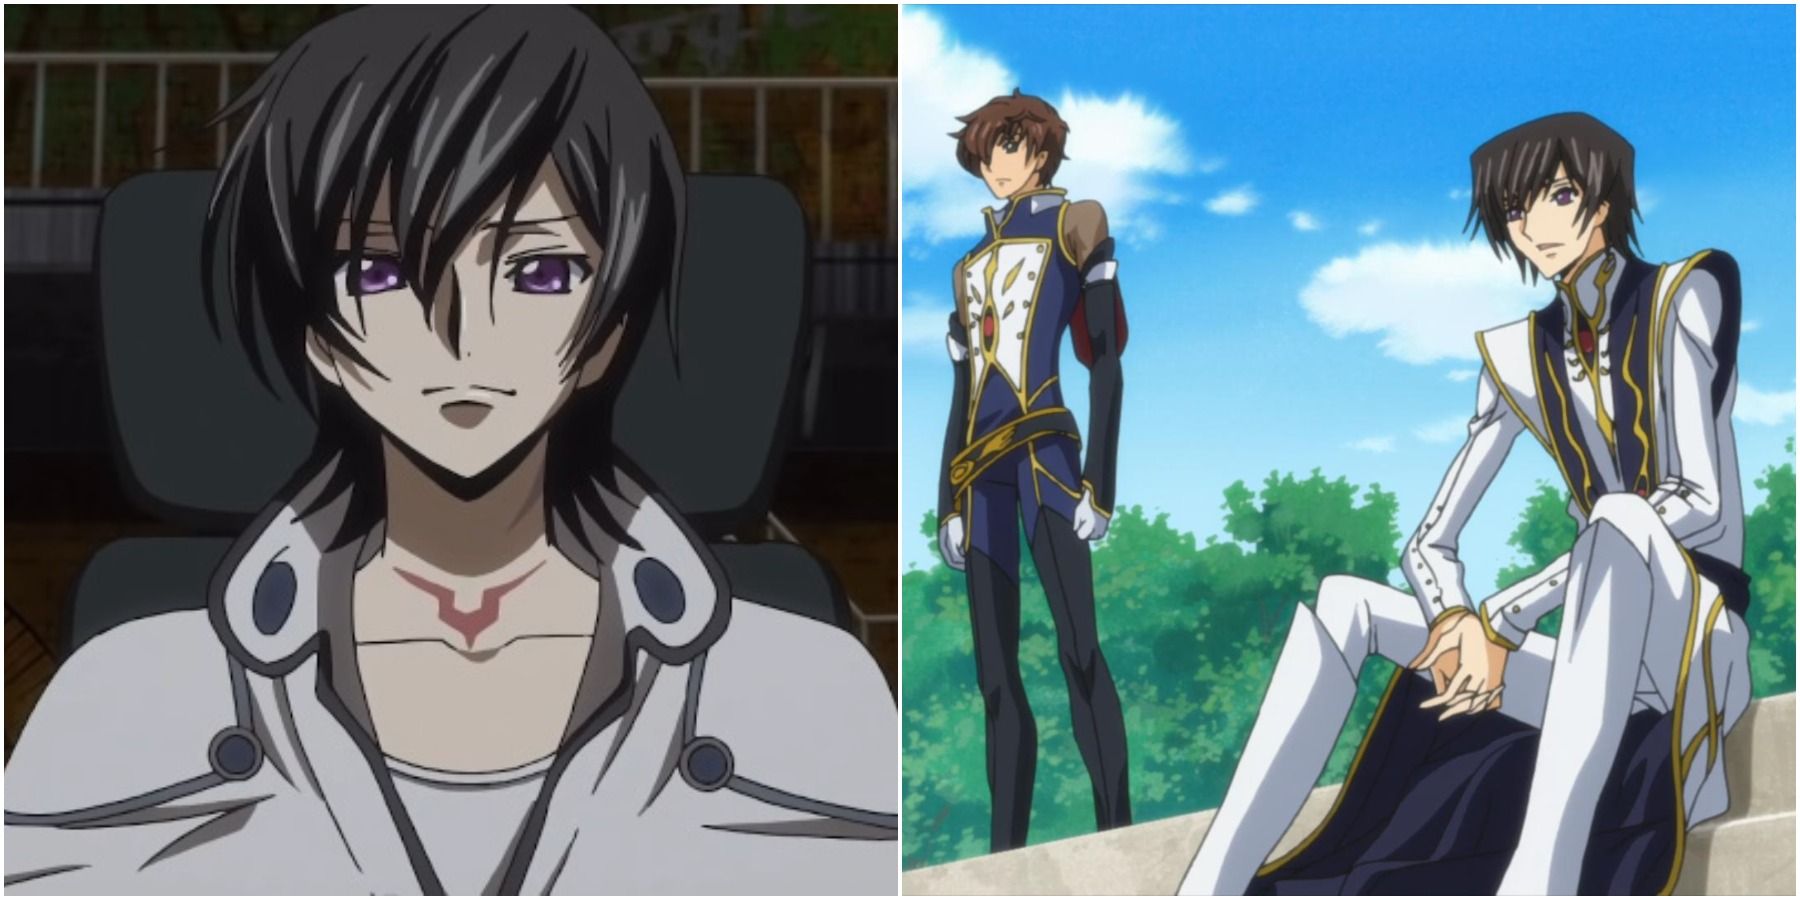 Split image of Lelouch and Lelouch with Suzaku. 